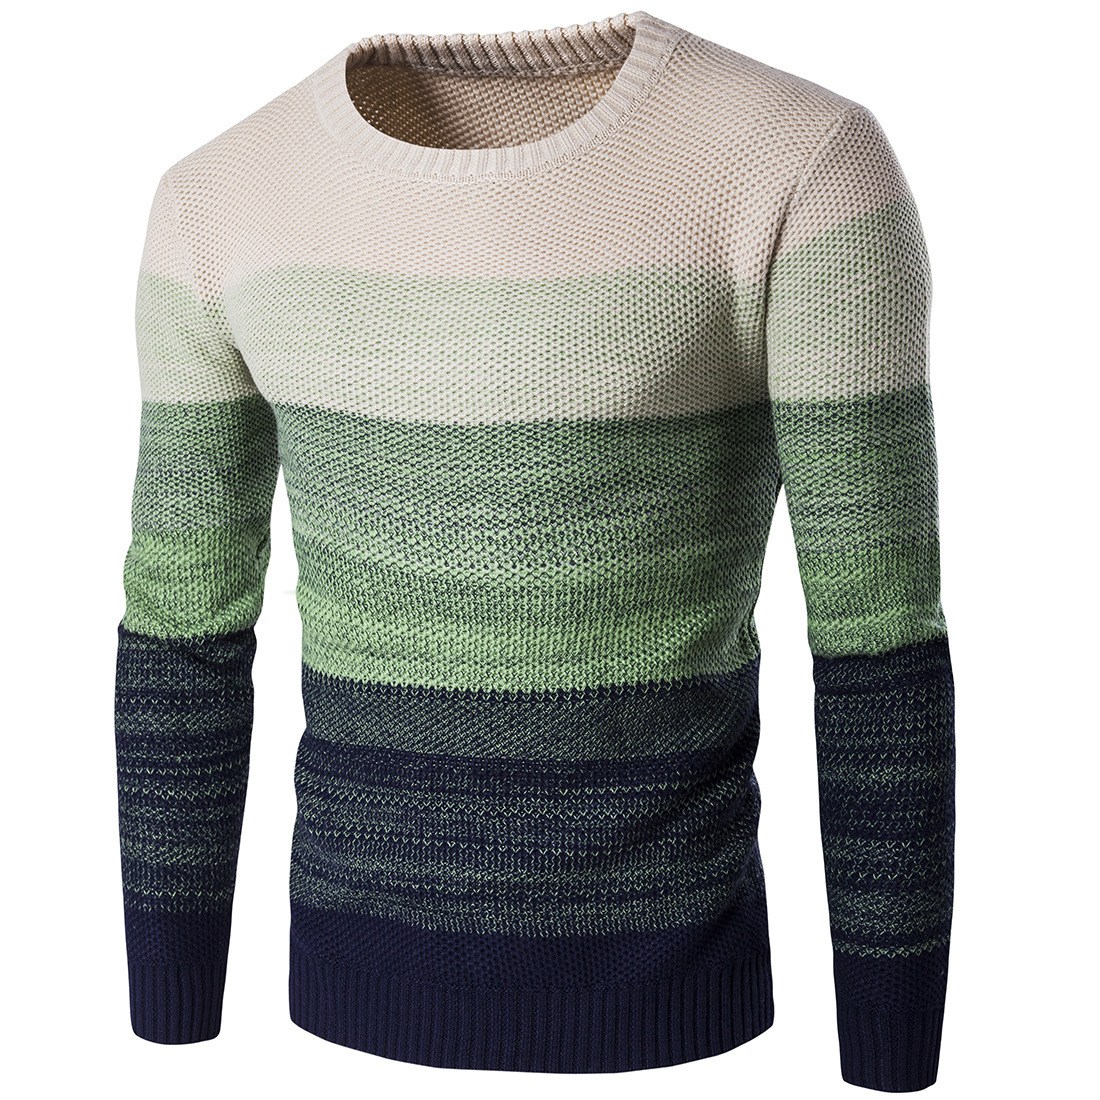 Men Knitted Sweater O Neck Striped Patchwork Casual Long Sleeve Slim Fit Pullover Tops Green